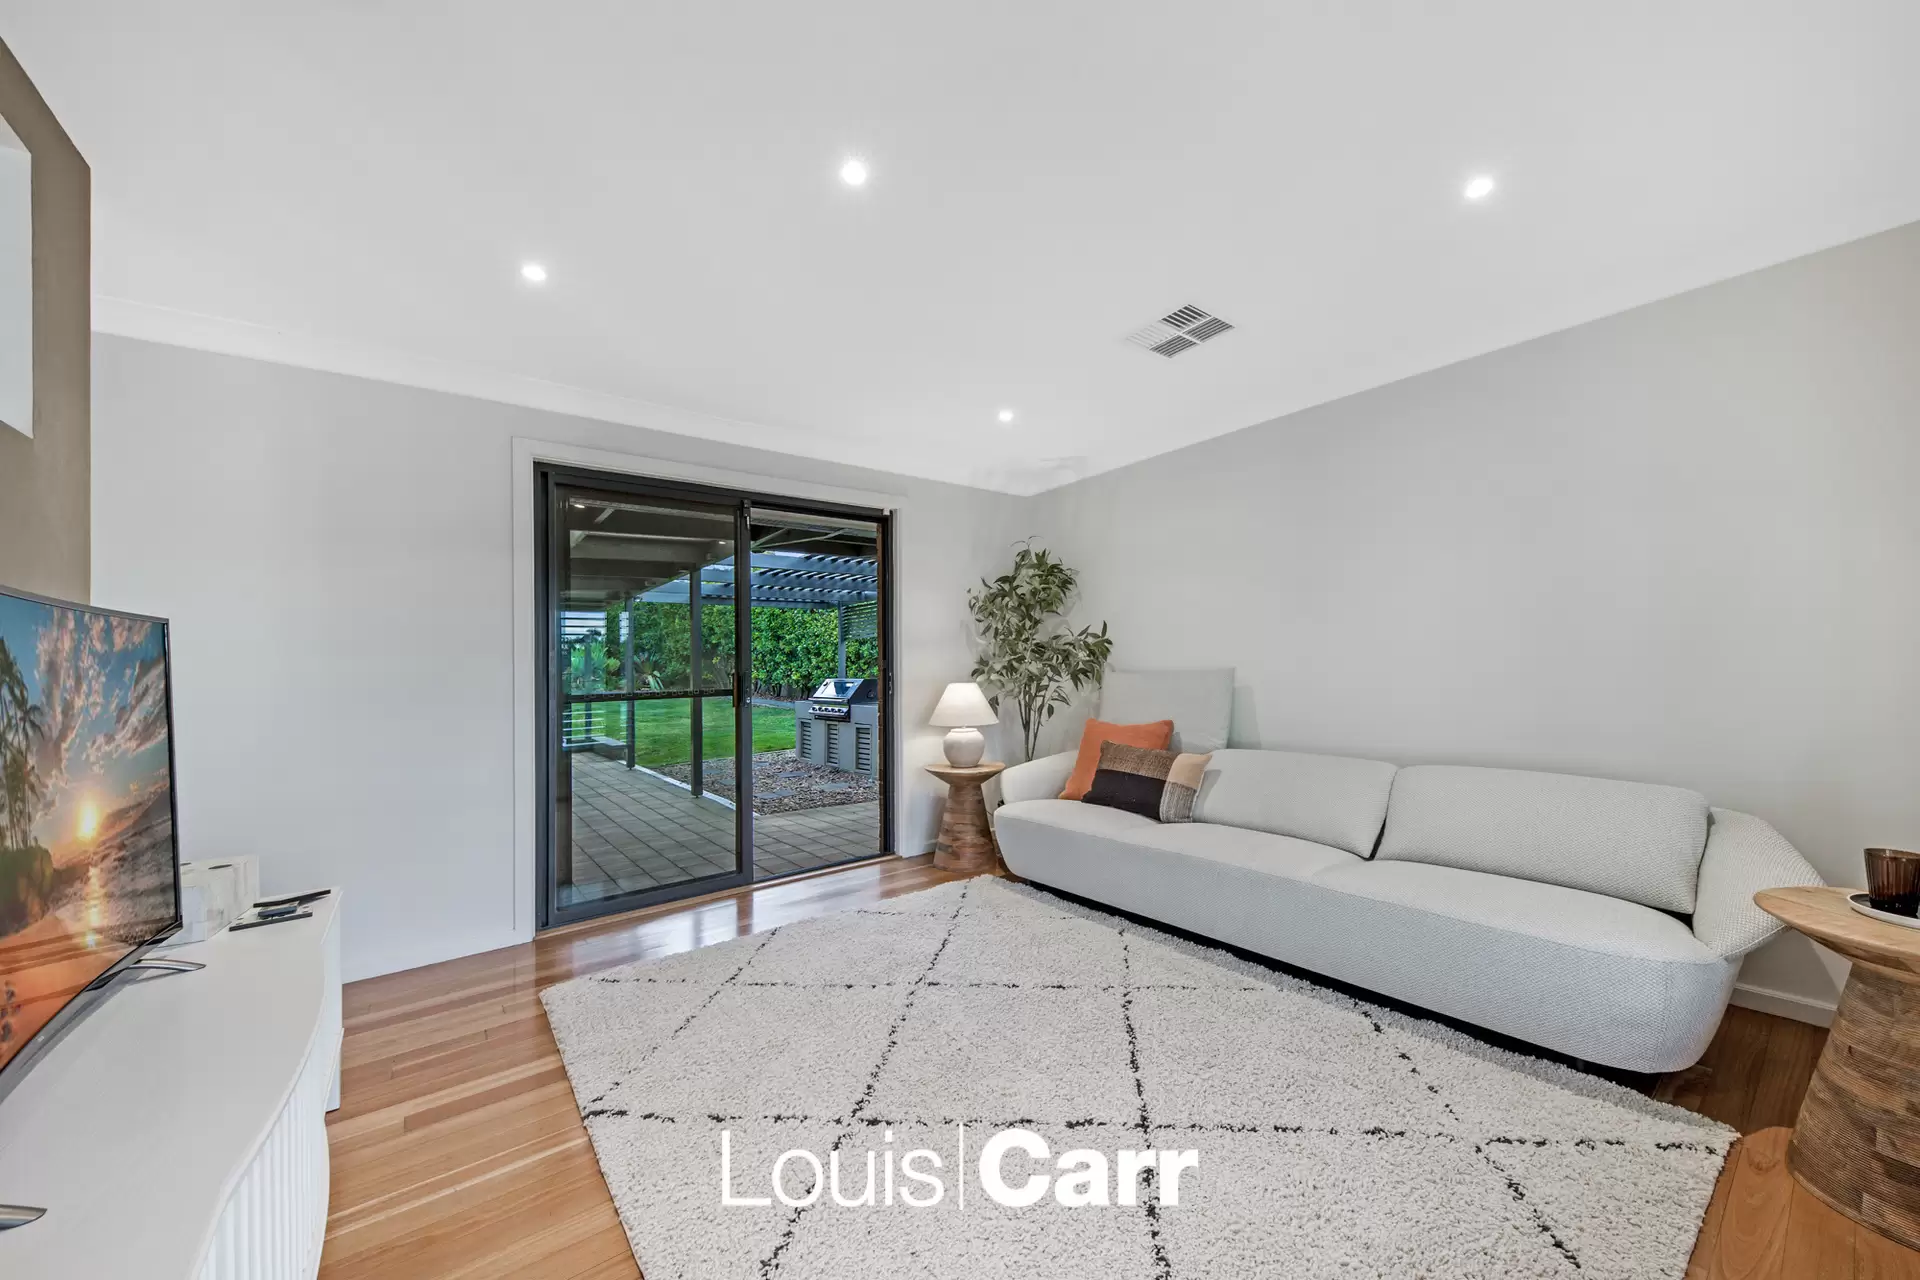 Photo #7: 18 Chiltern Crescent, Castle Hill - Sold by Louis Carr Real Estate